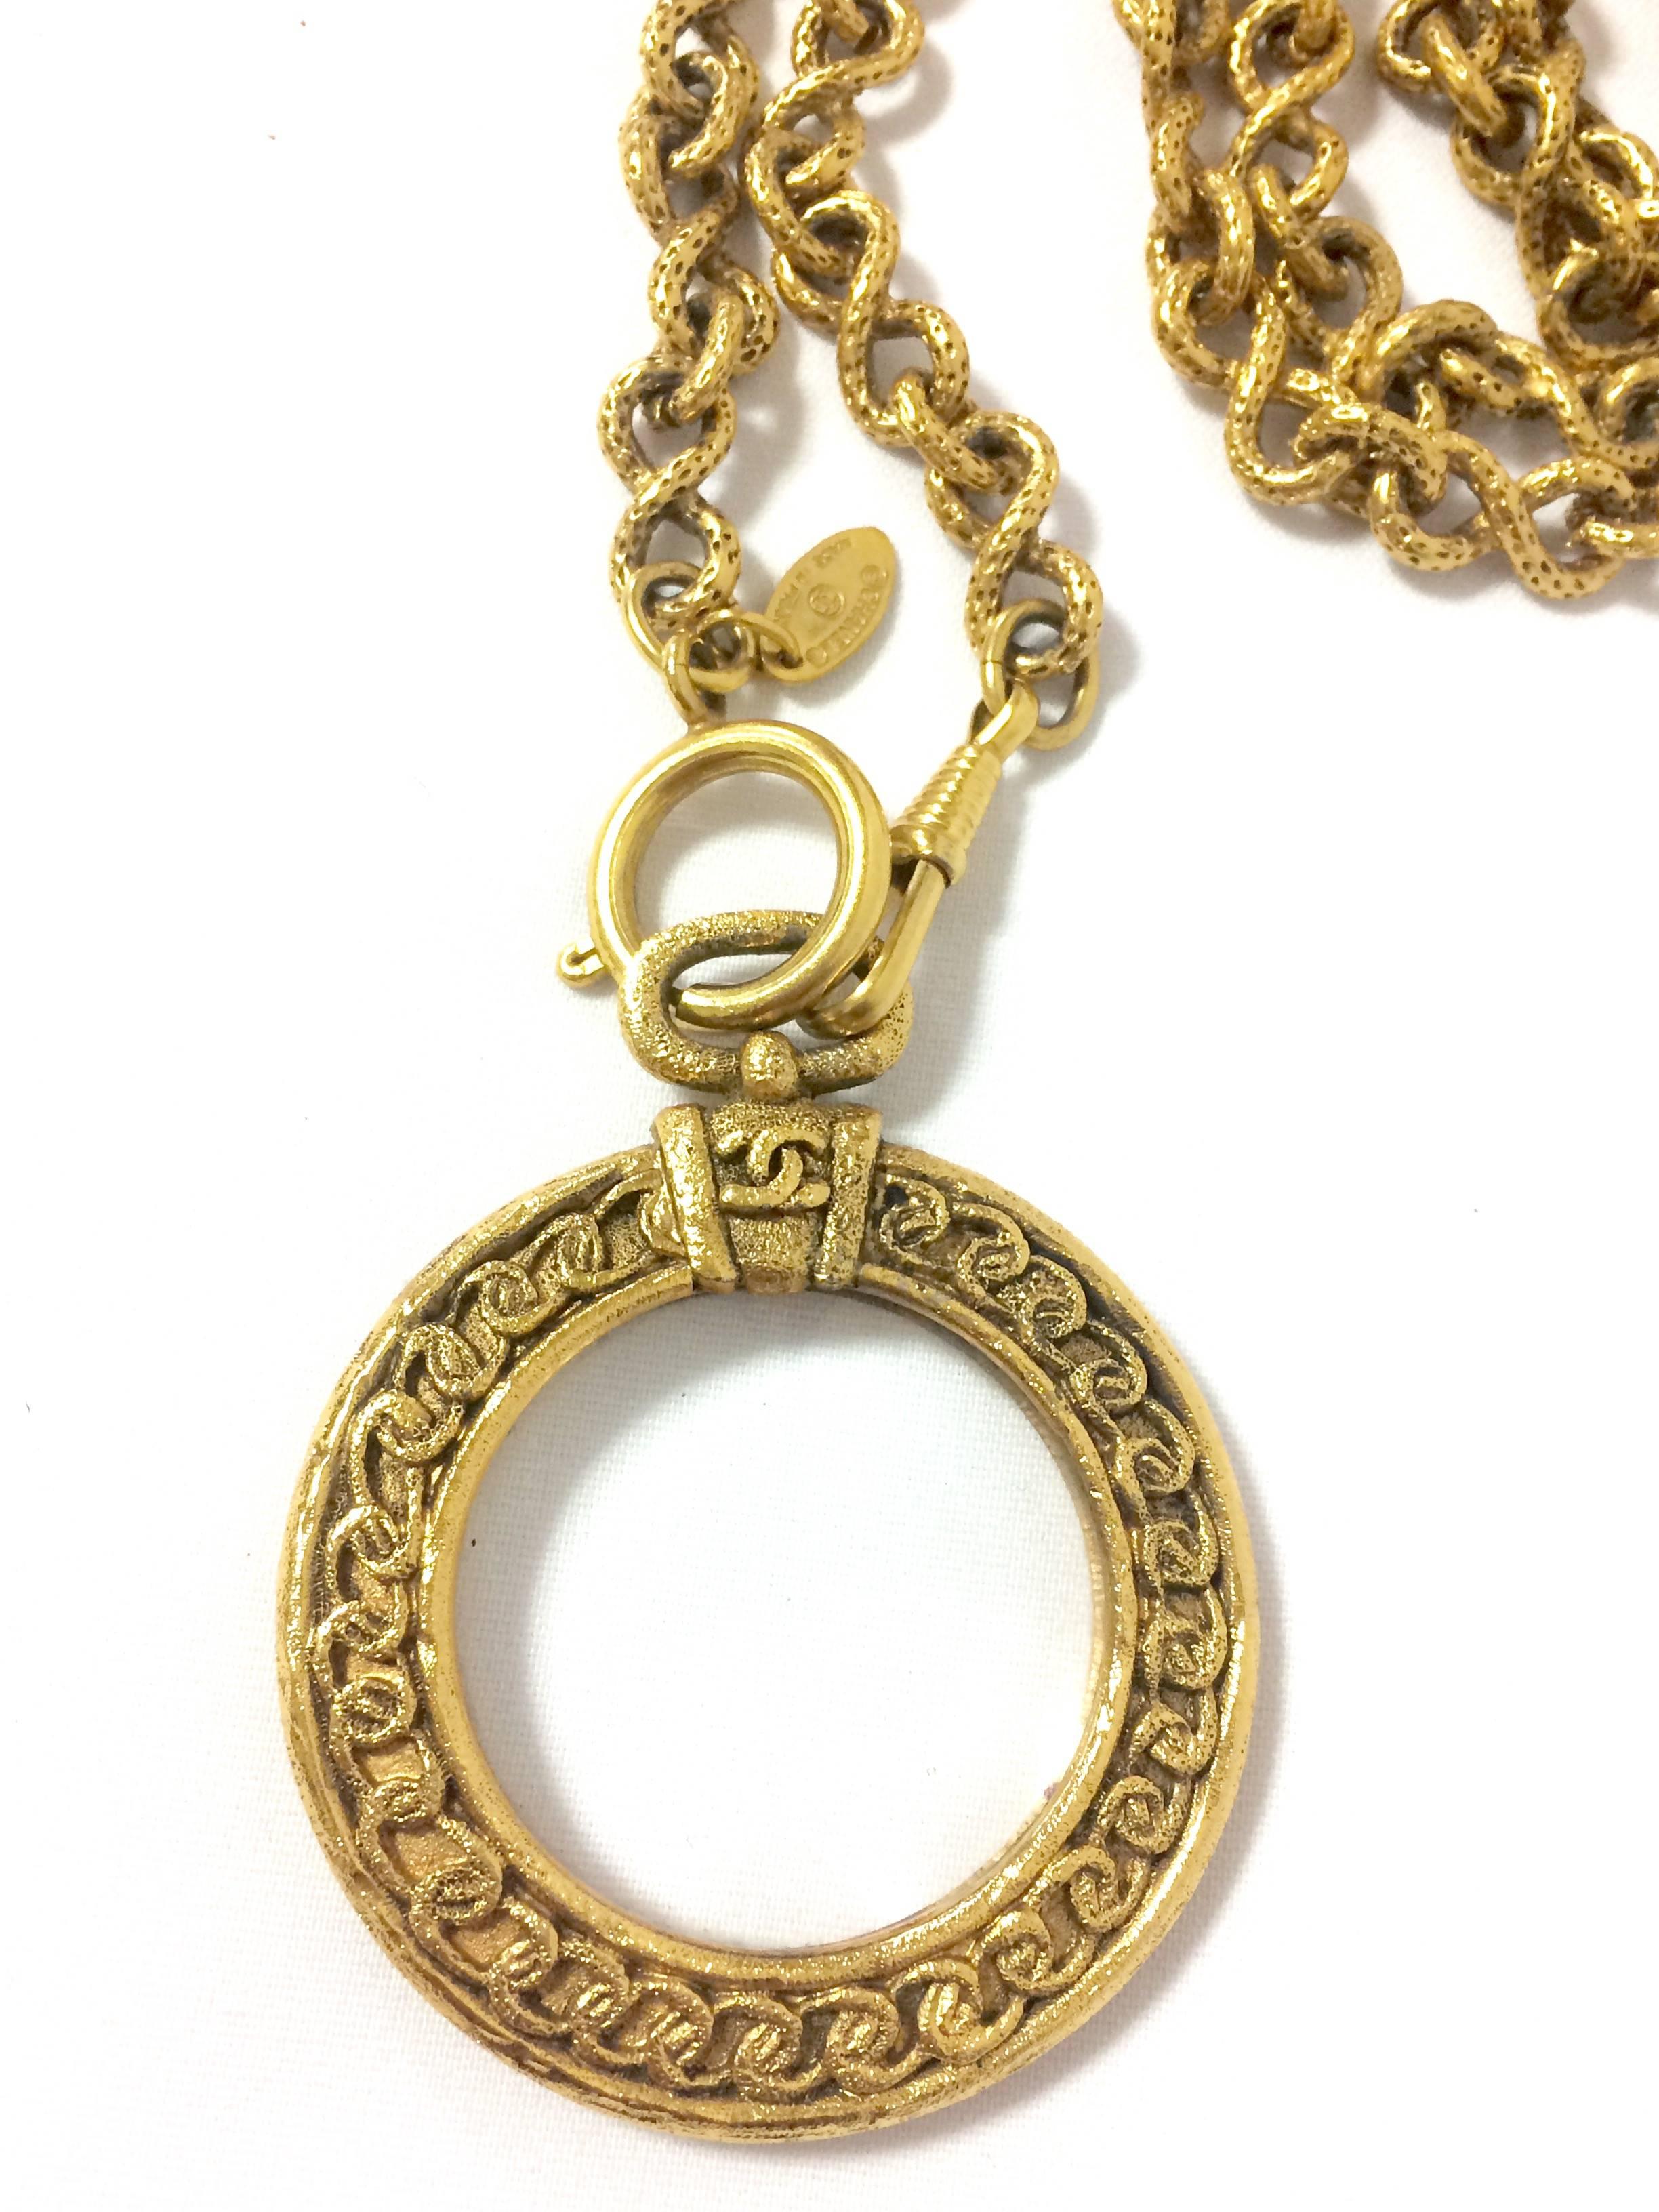 Women's Vintage CHANEL long chain necklace with round glass loupe pendant top and CC.